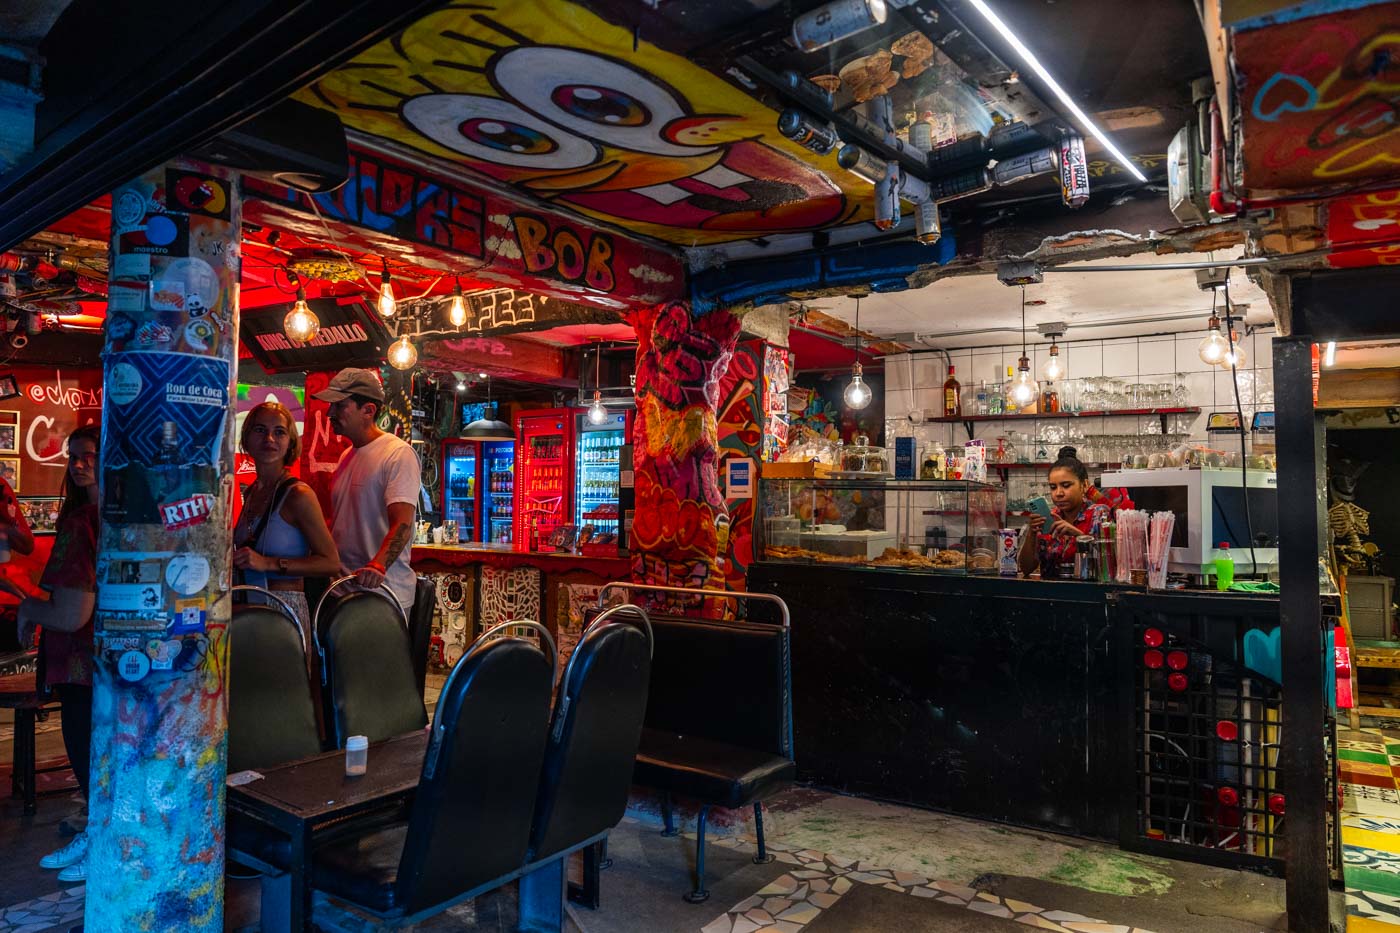 A unique looking bar with an underground aesthetic and a painting of Spongebob on the ceiling.